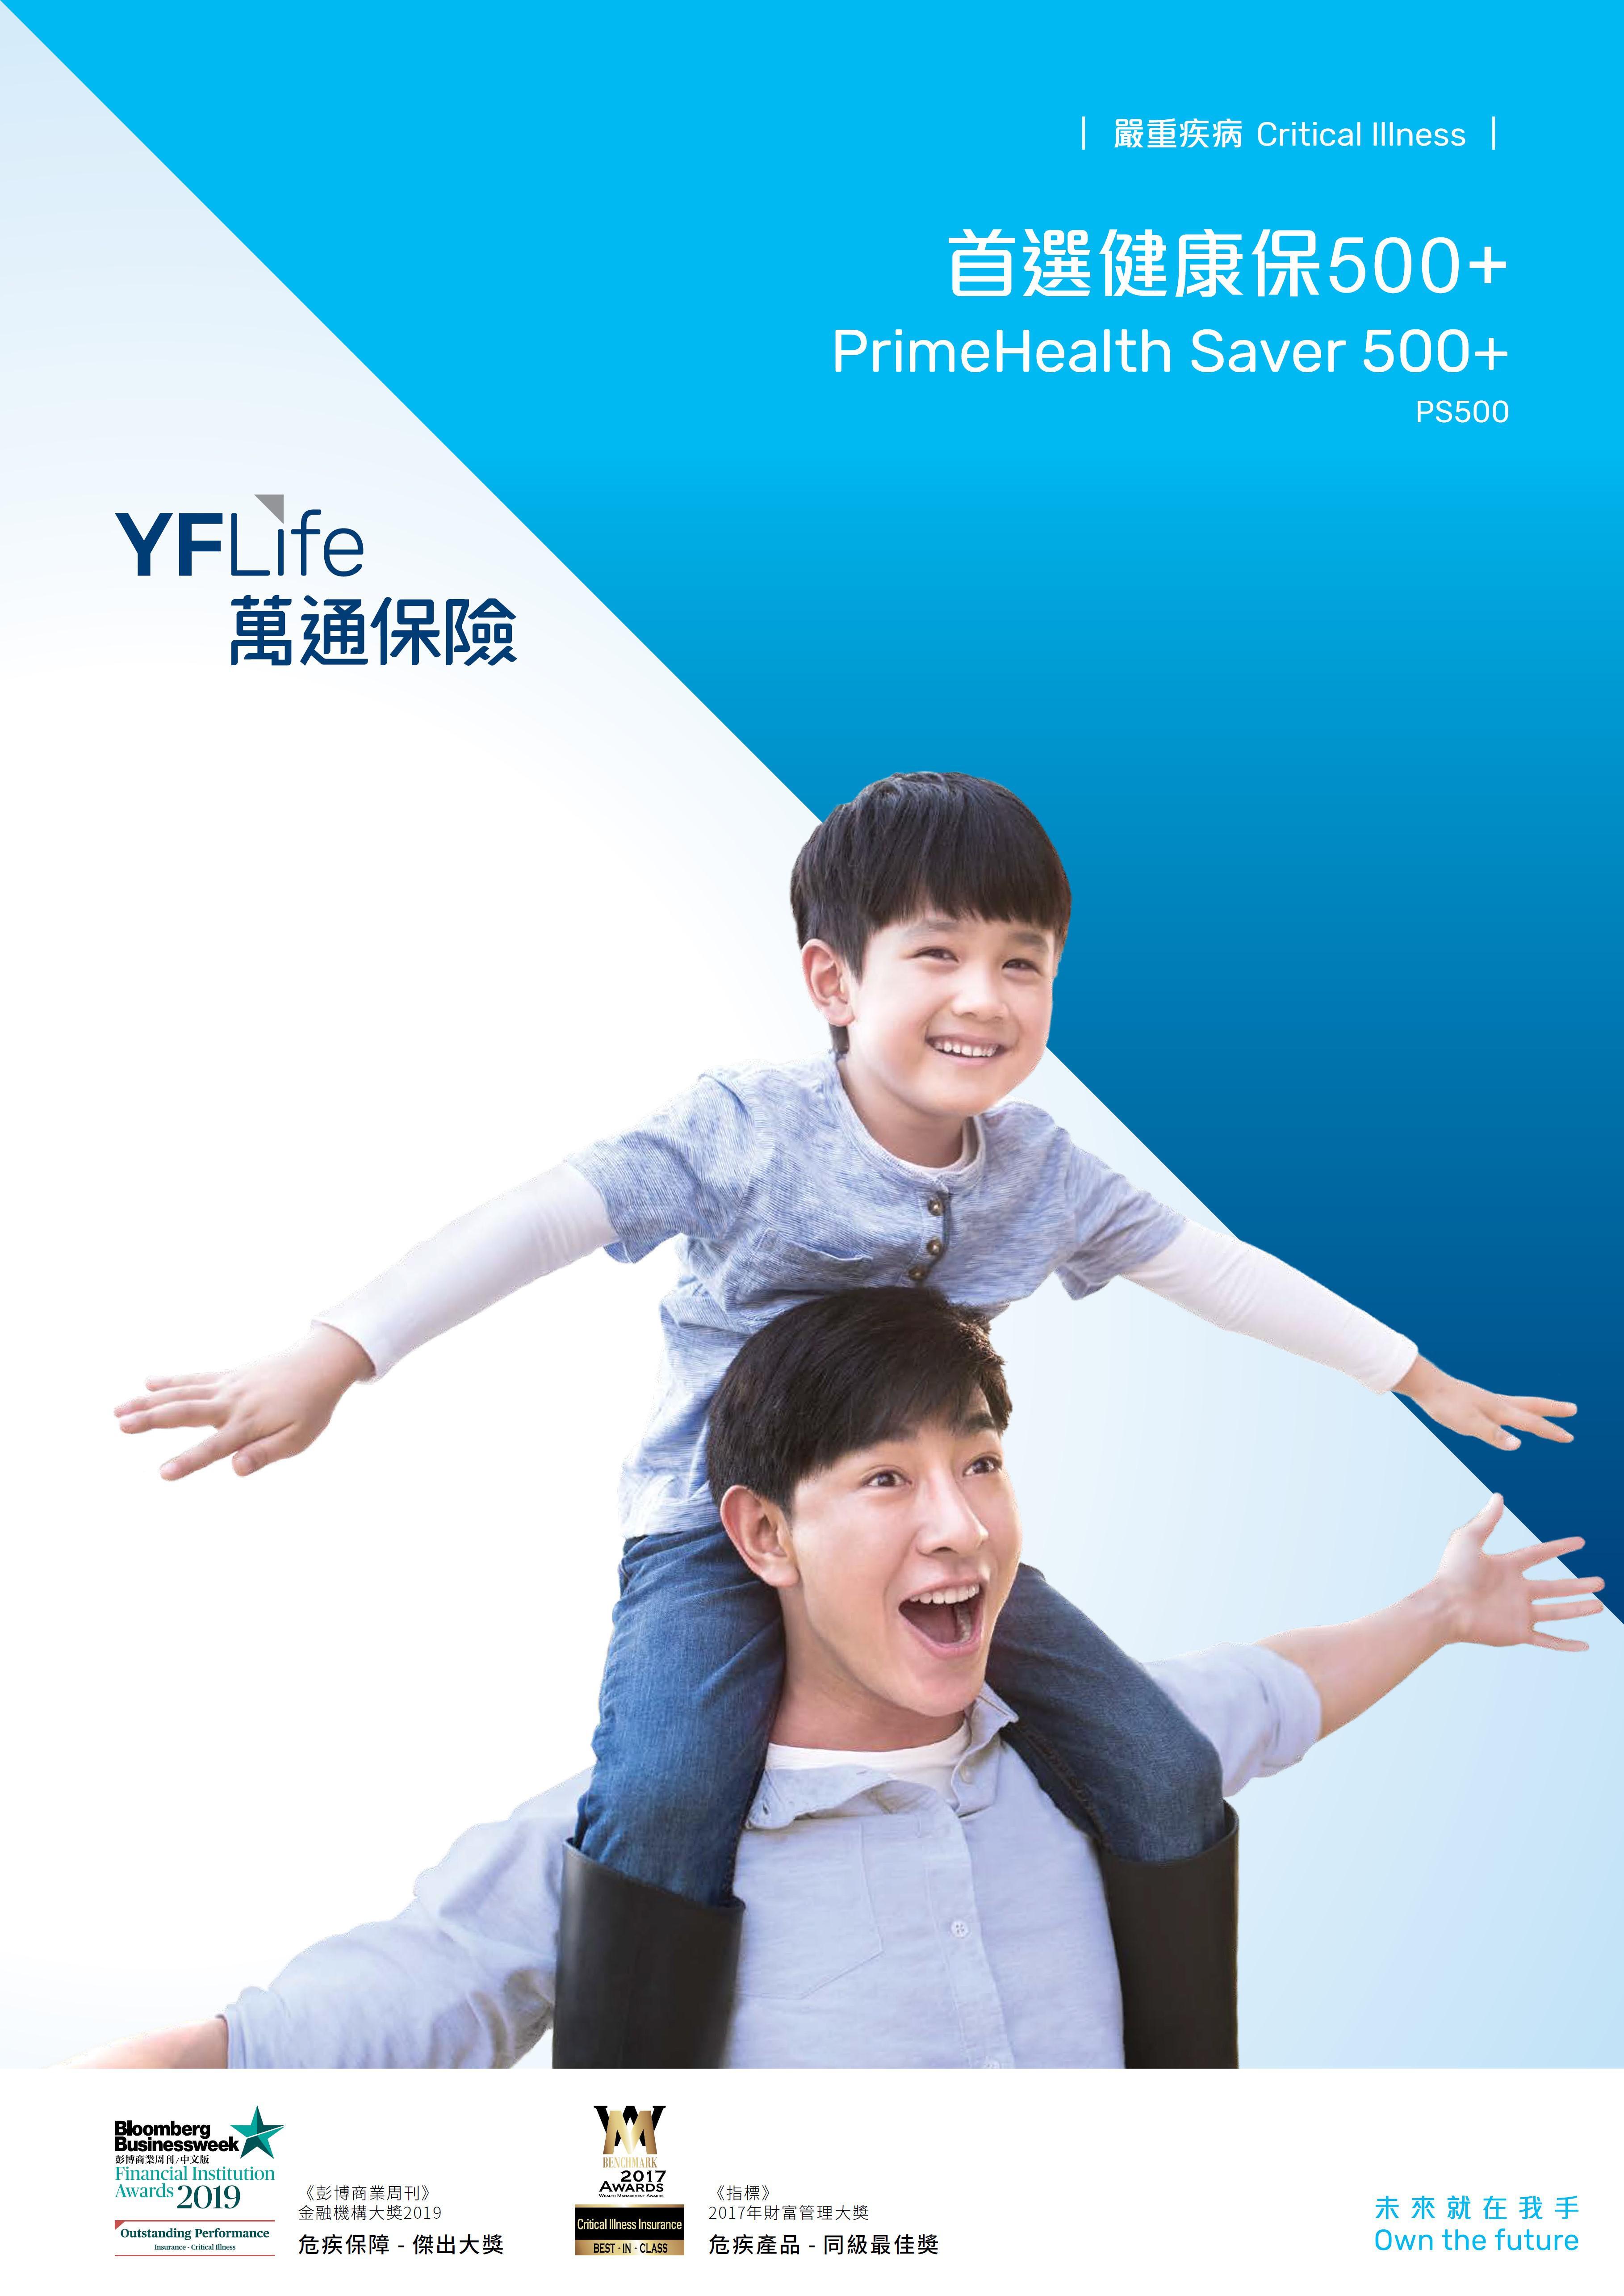 YF Life has launched “PrimeHealth Saver 500+”, offering four additional claim payments for cancer, heart attack or stroke, plus a “Cash Benefit for Continuous Cancer”, with total benefits payable up to 680% of sum insured.